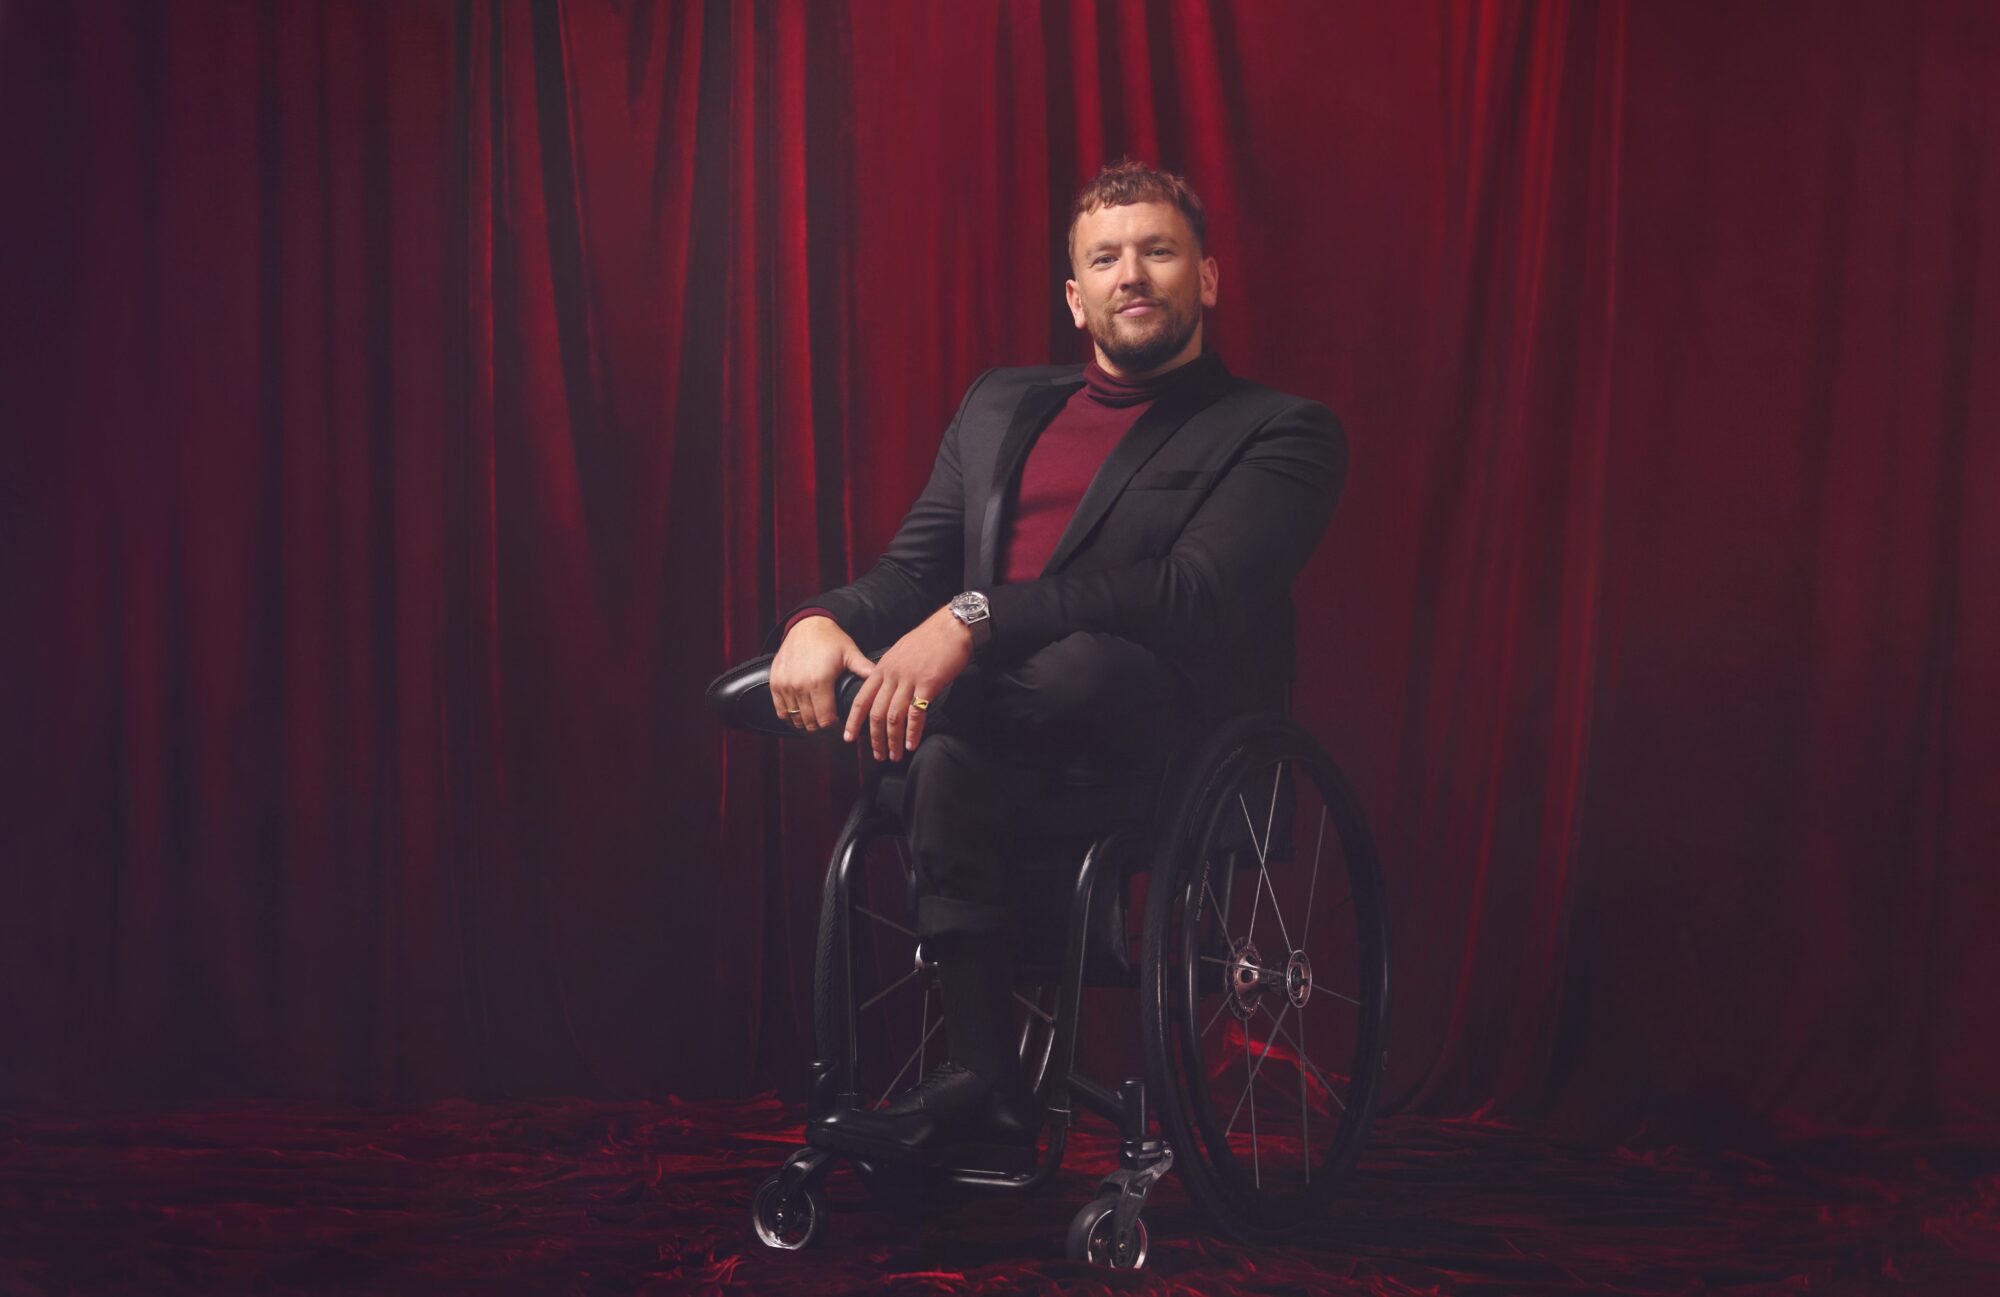 Australian of the Year Dylan Alcott (AO) is partnering with iconic Australian winery Grant Burge to head their Leave Your Mark campaign